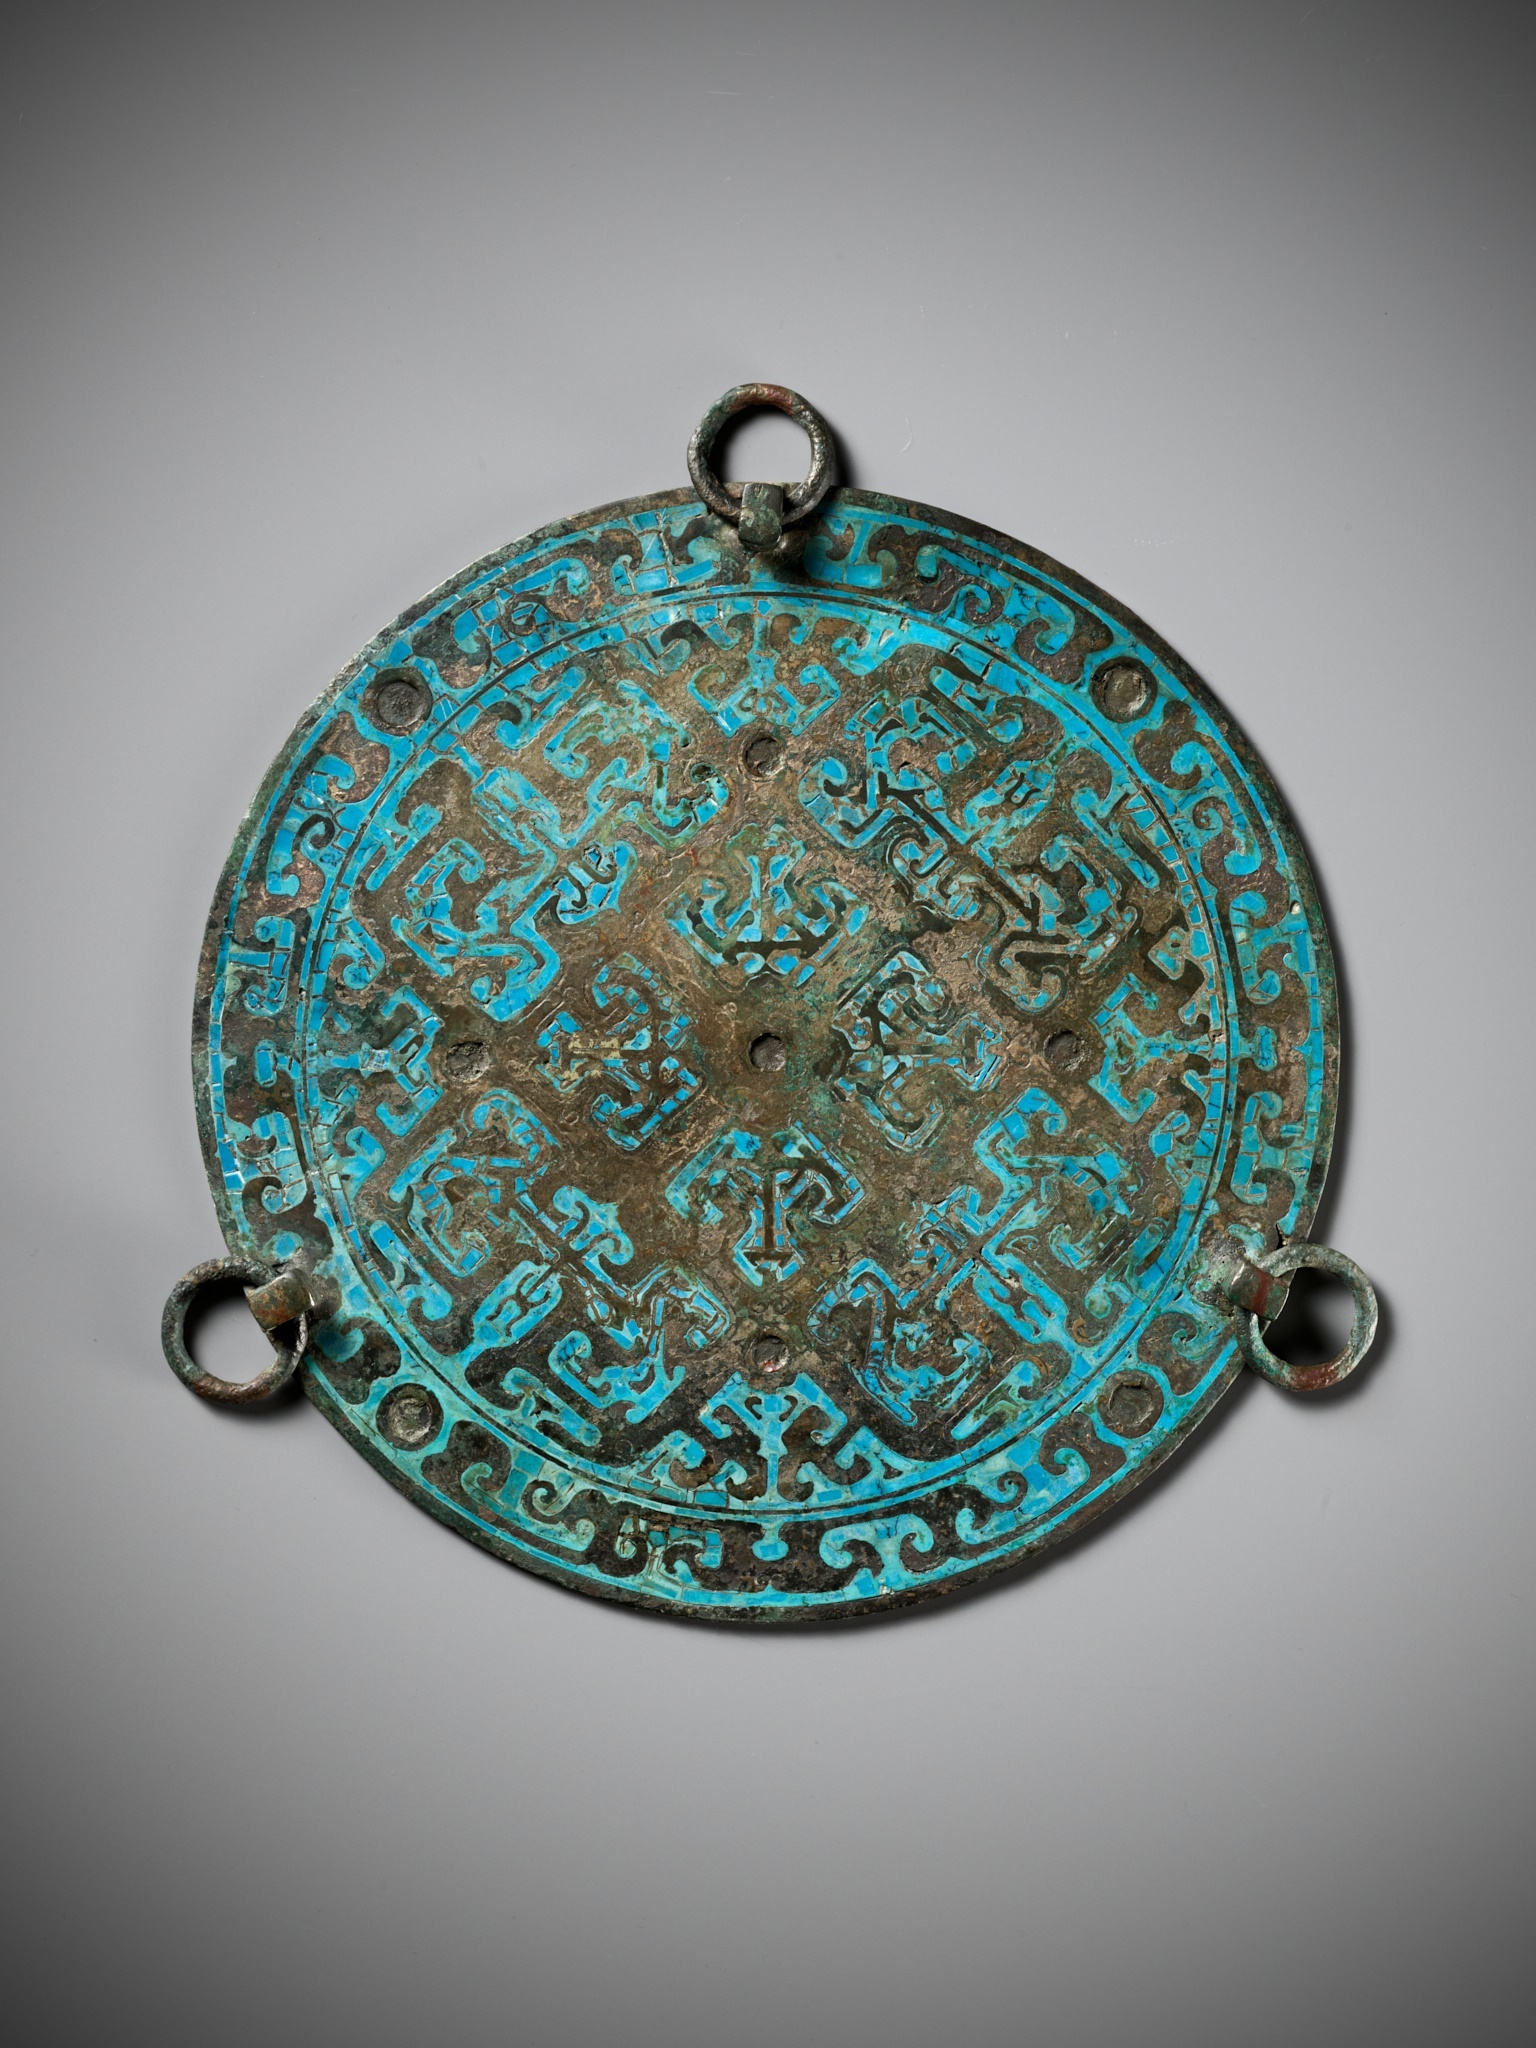 A RARE TURQUOISE-INLAID BRONZE MIRROR, WARRING STATES PERIOD - Image 13 of 13